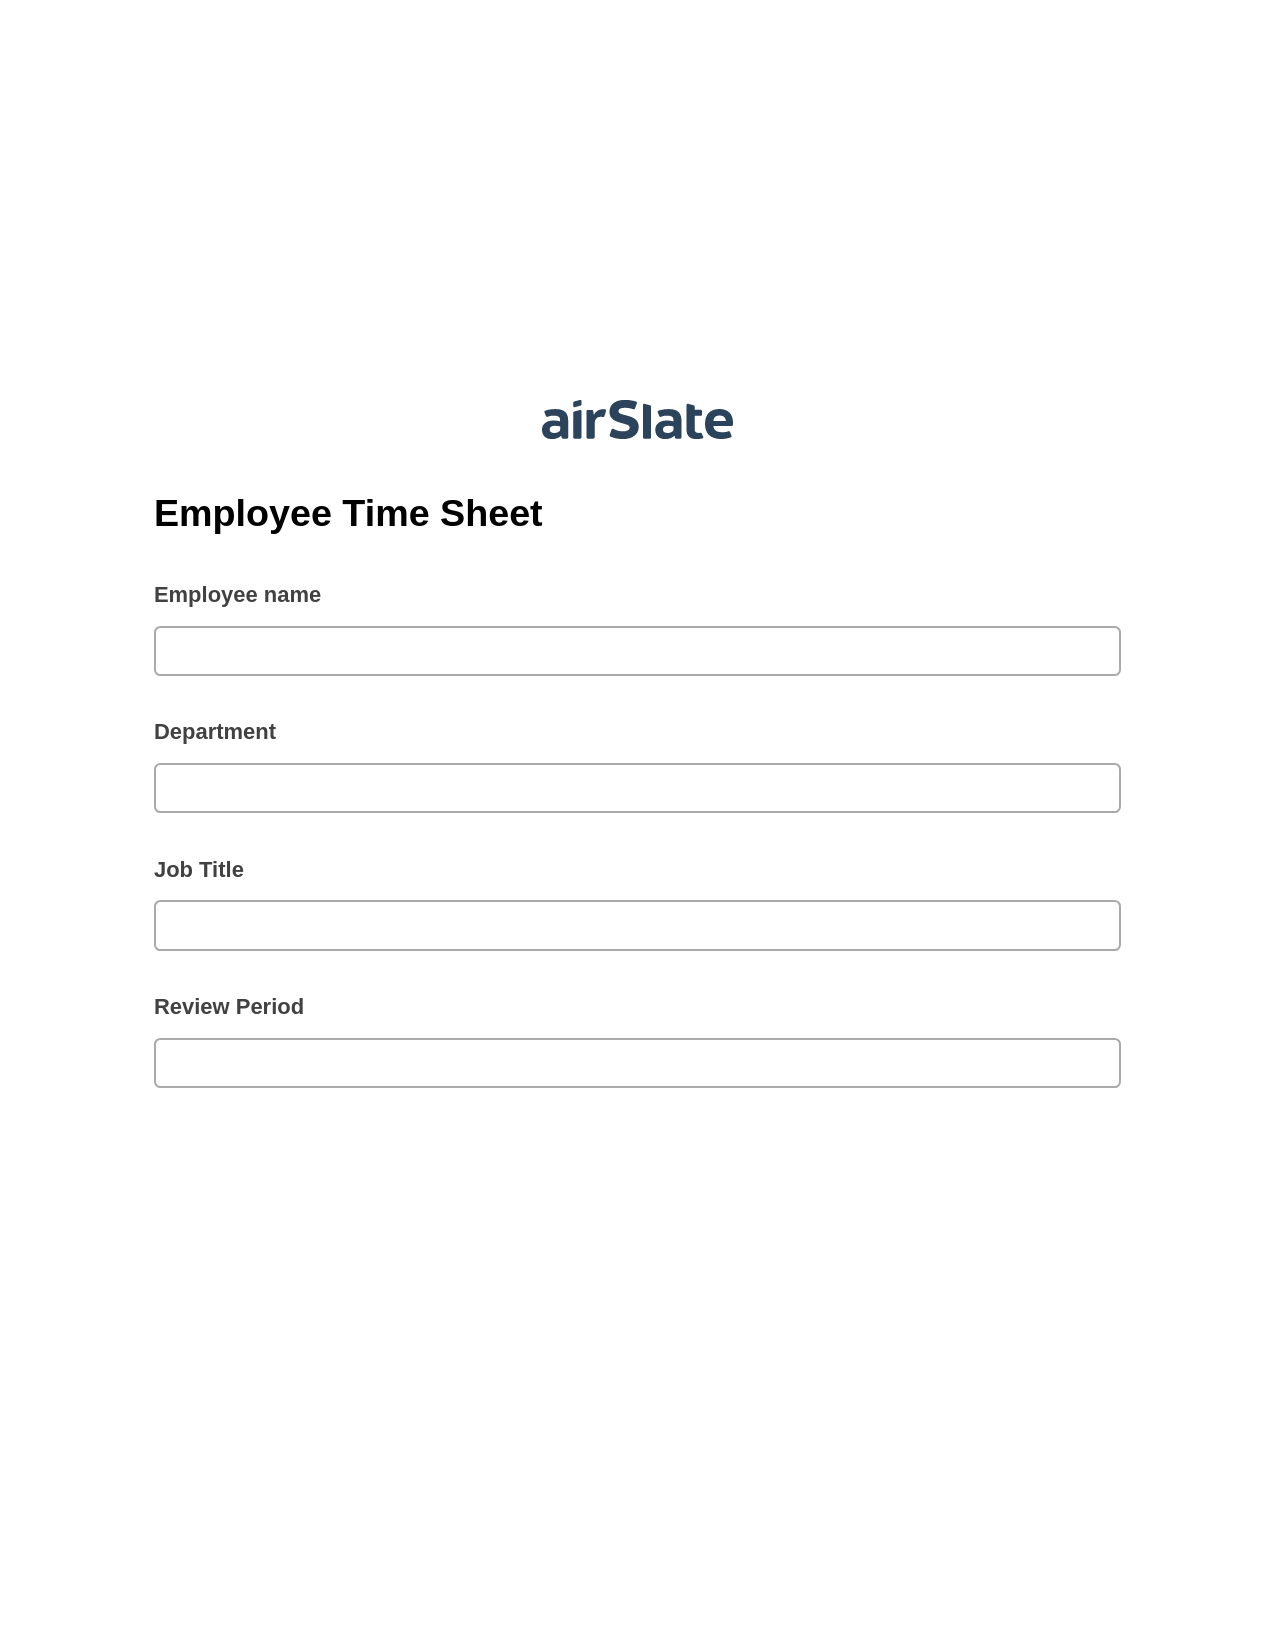 Multirole Employee Time Sheet Pre-fill Dropdowns from CSV file Bot, Create Salesforce Records Bot, Export to Excel 365 Bot